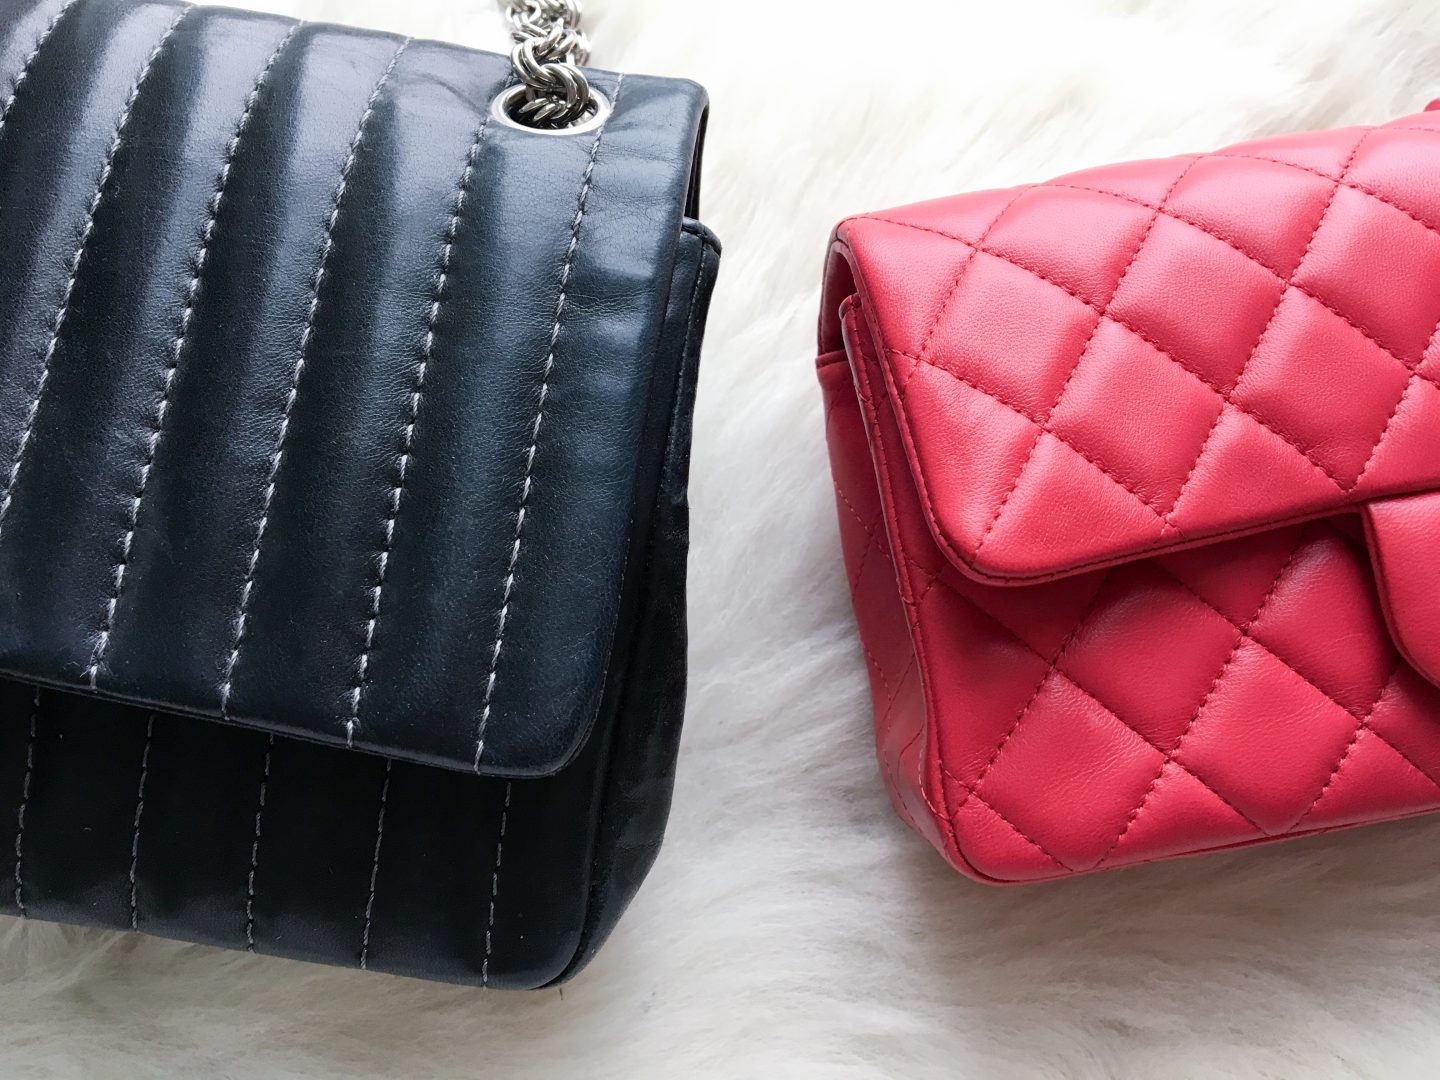 Chanel Caviar or Lambskin: Which one is better?